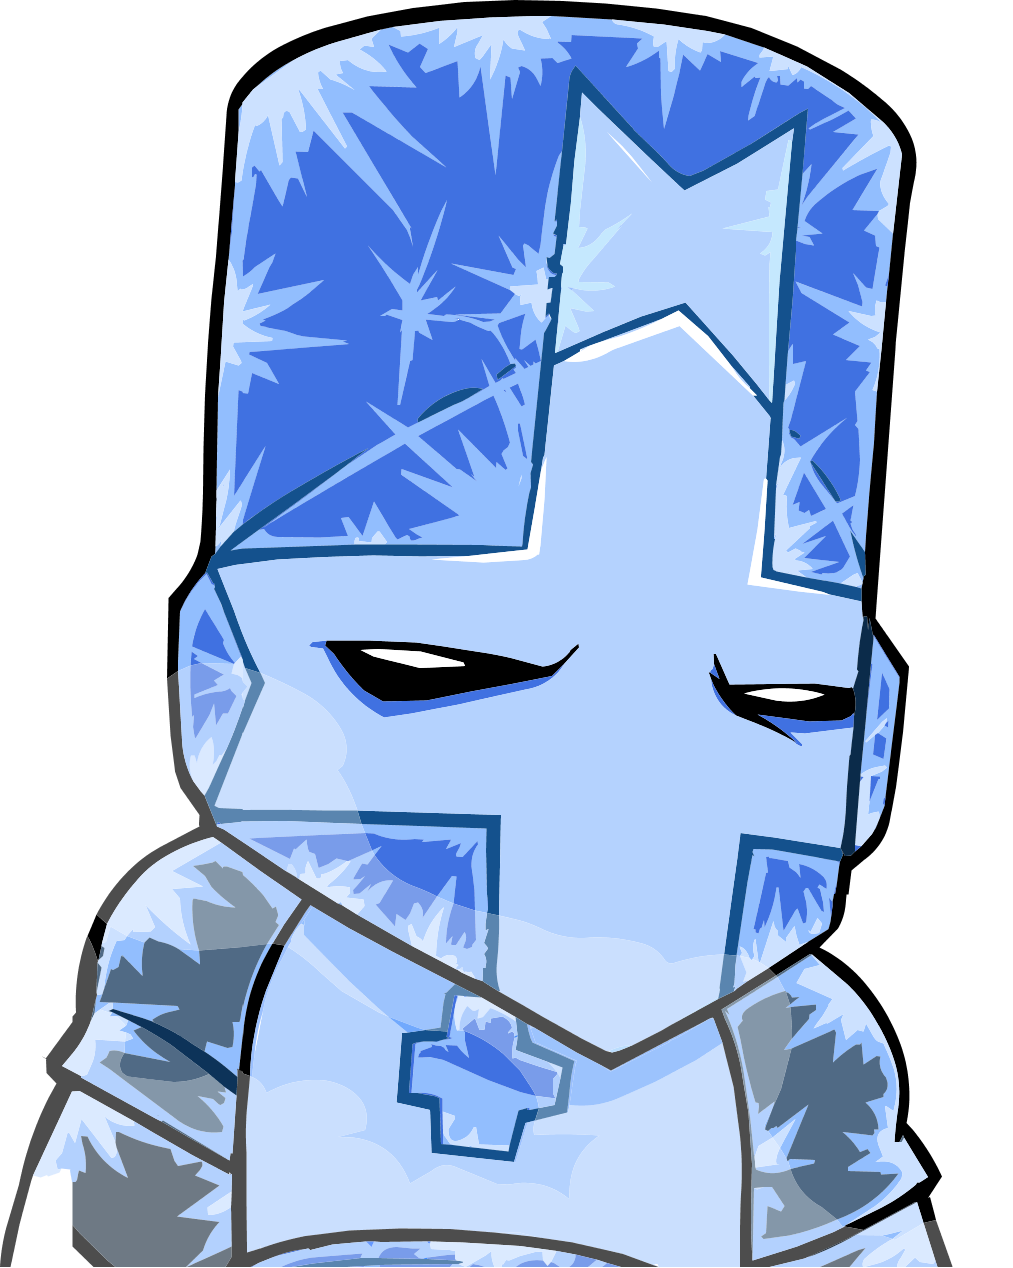 castle crashers 2 characters